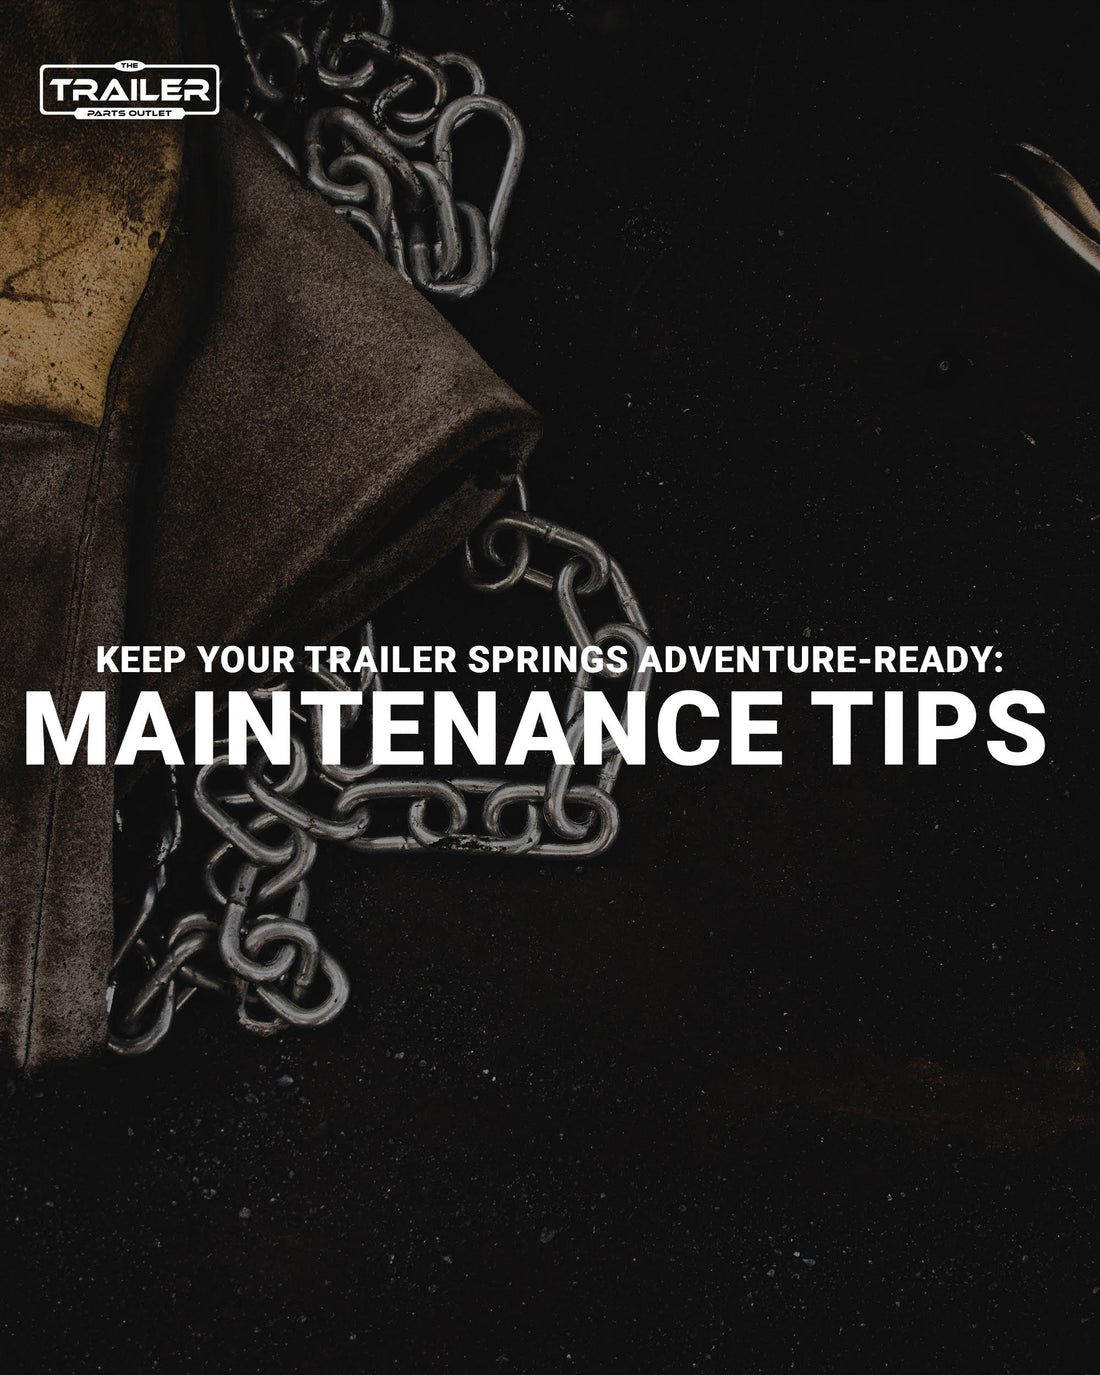 Keep Your Trailer Springs Adventure-Ready: Maintenance Tips